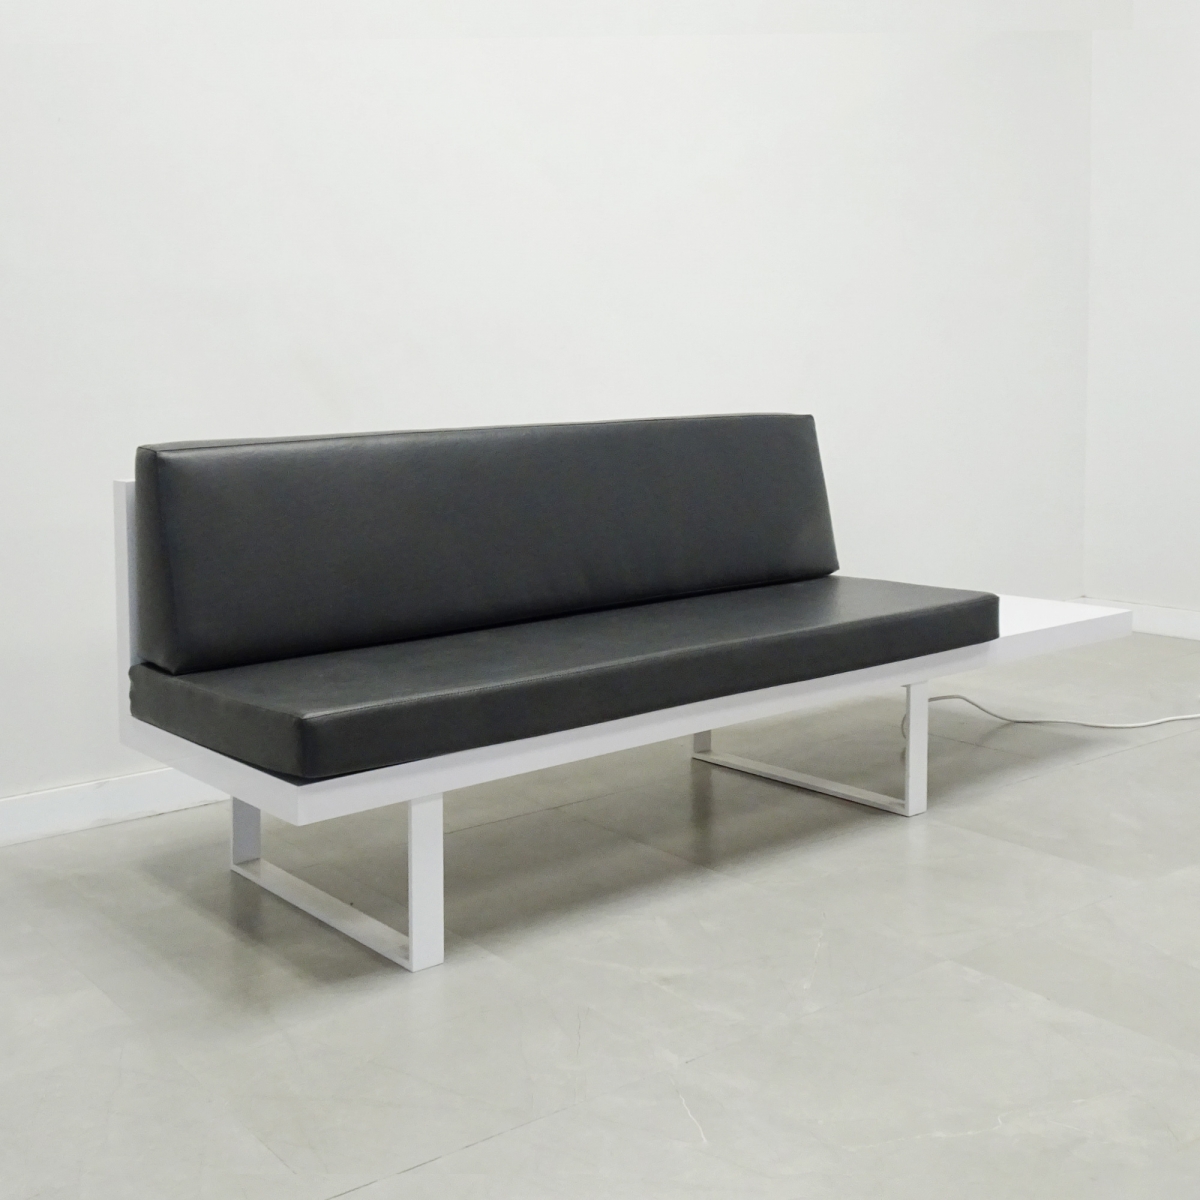 96 In Axis Straight Sofa - Stock #1001